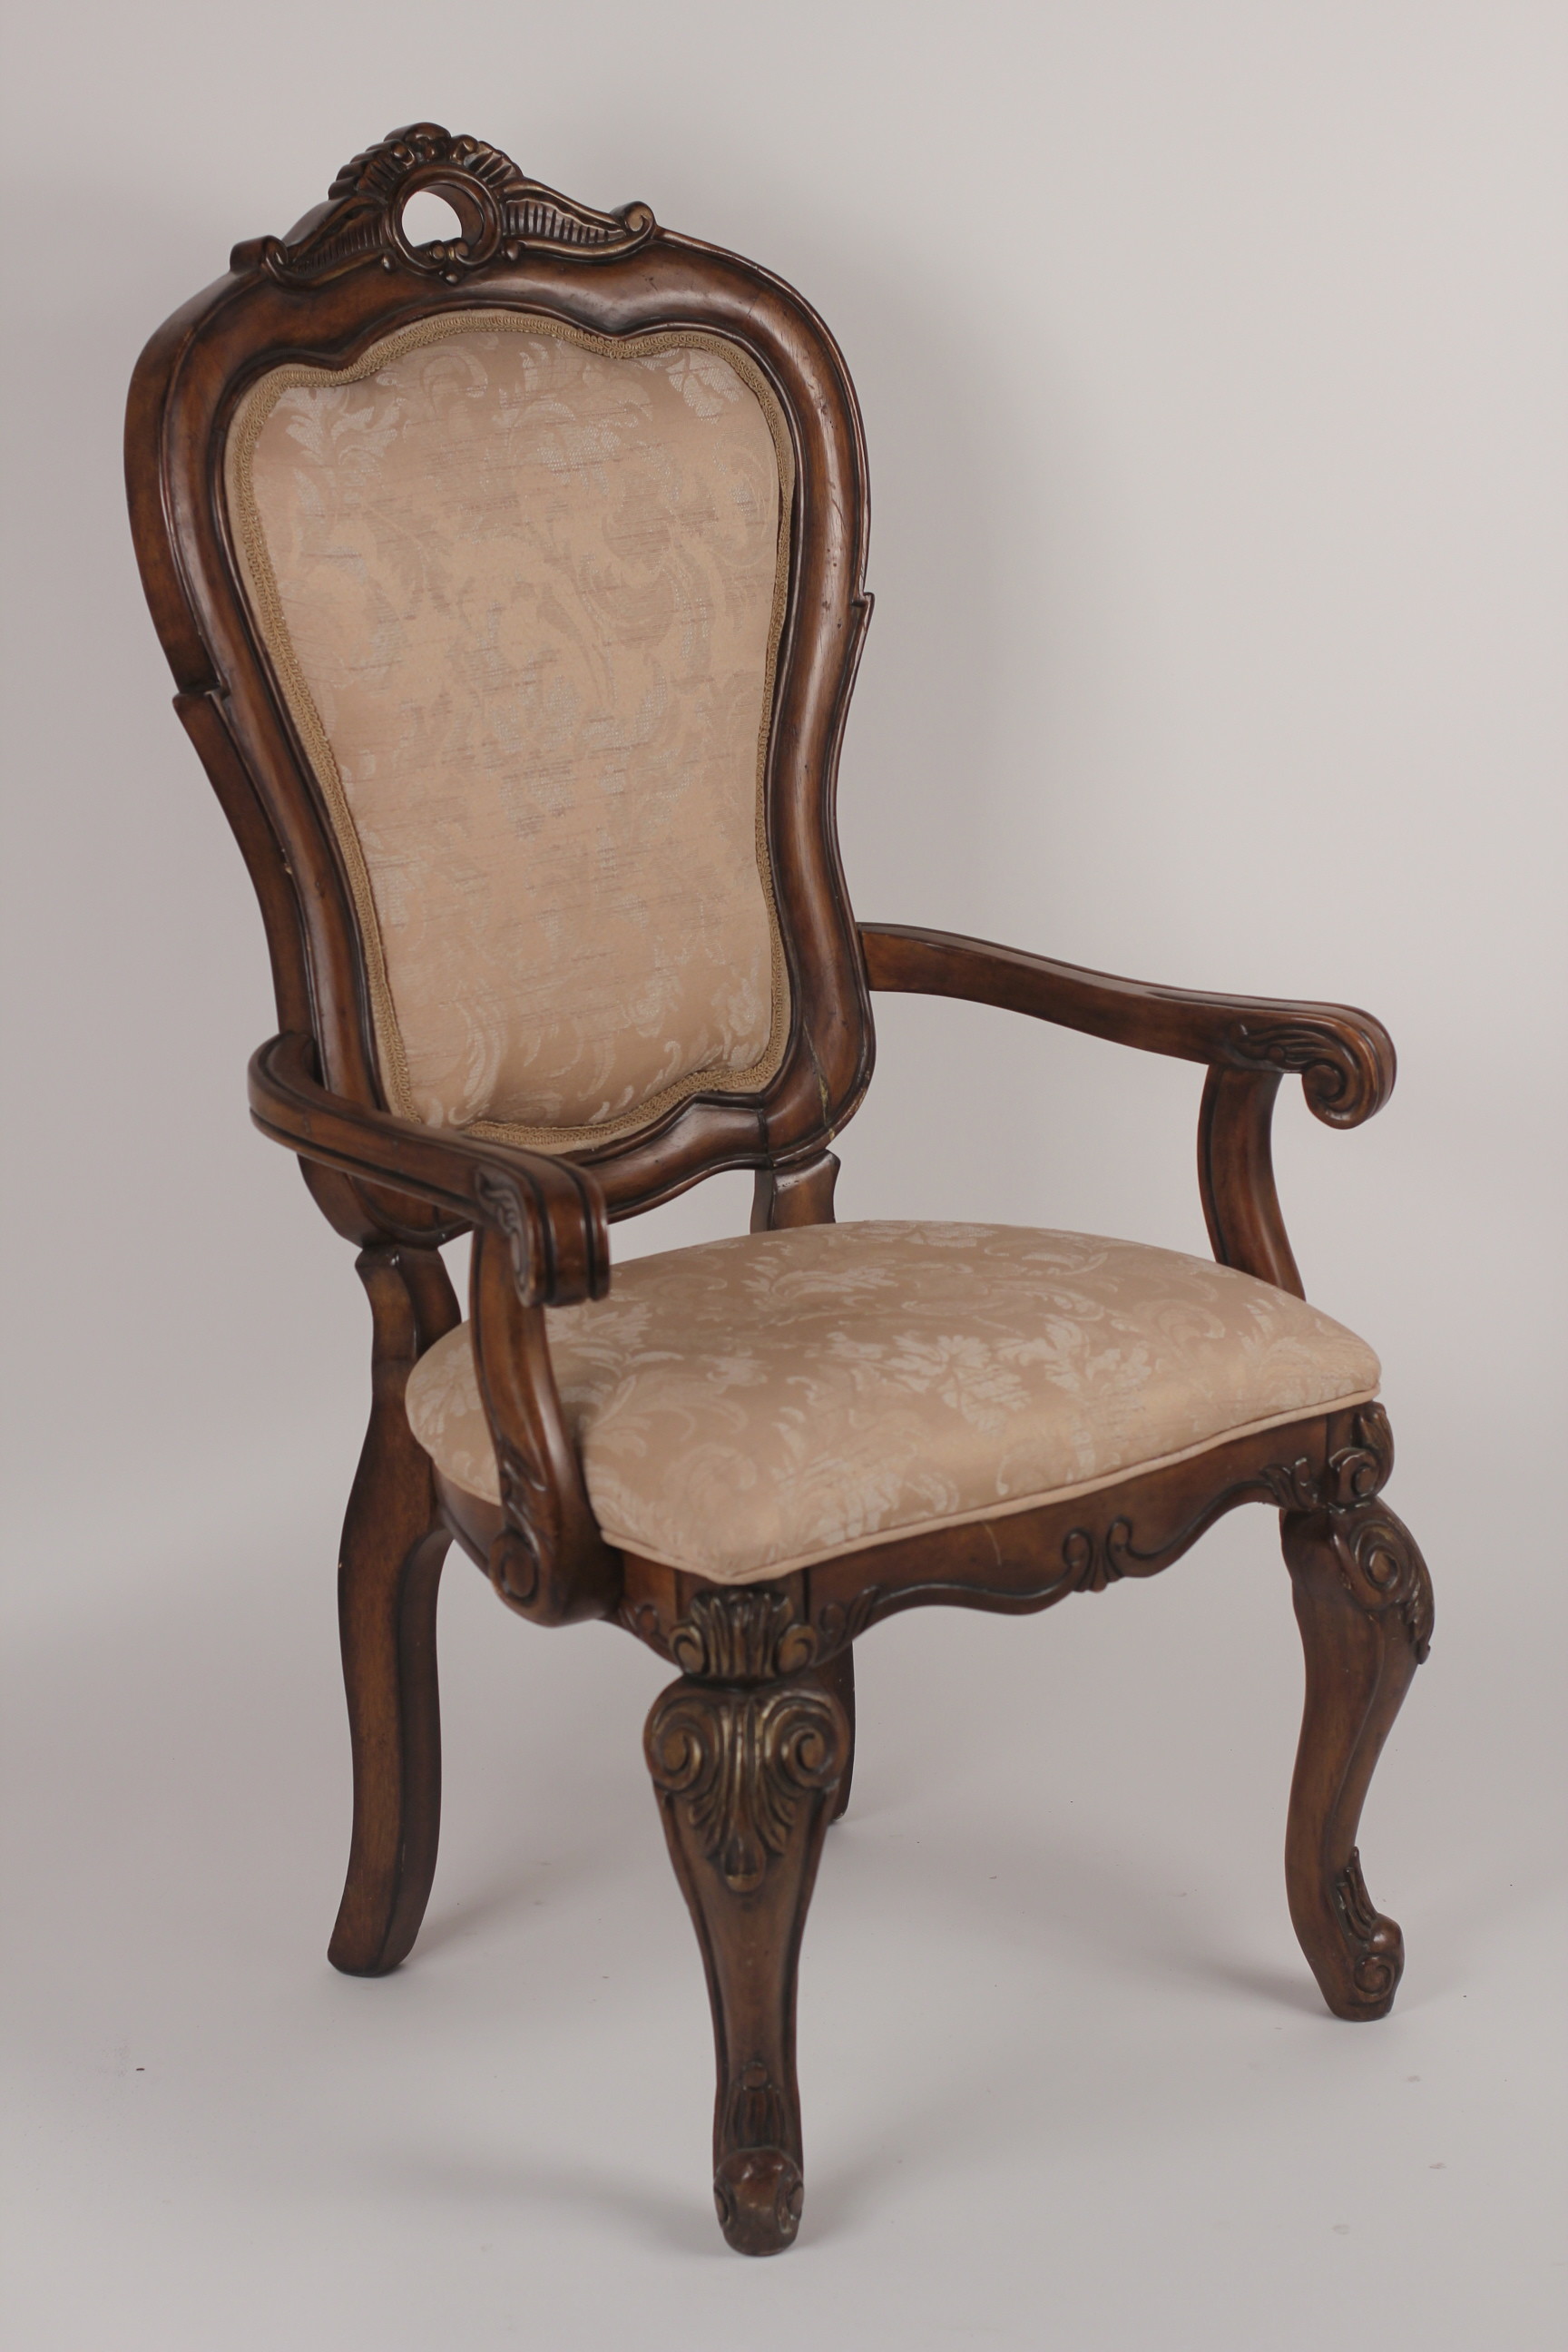 1728x2592 Queen Anne Furniture For Sale Fresh Queen Anne Chairs For Sale 14365 House  Decorating Ideas